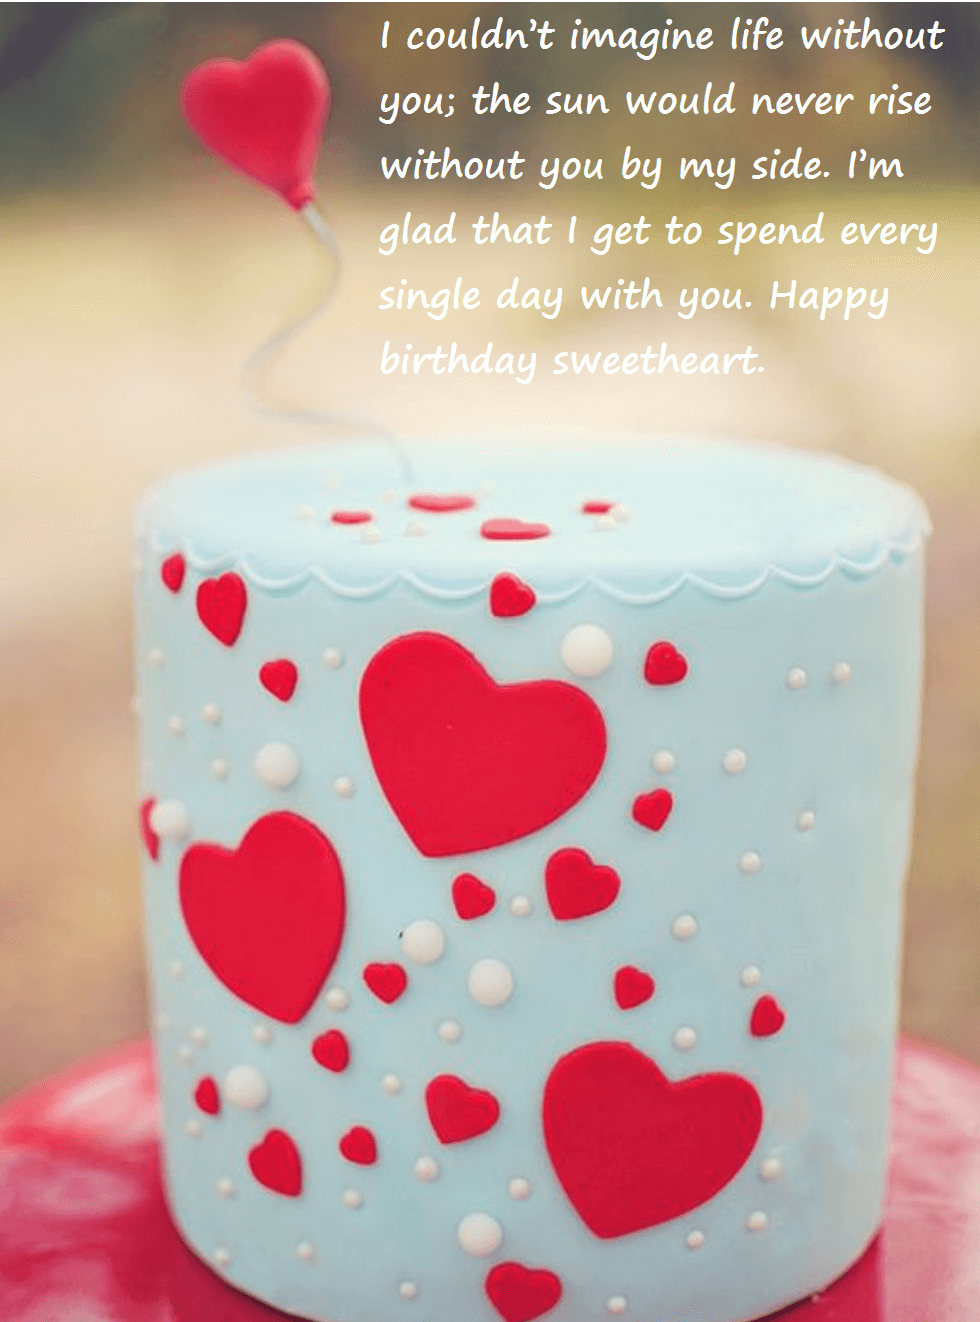 Birthday Love Quotes Images, Pics For Wife | Best Wishes